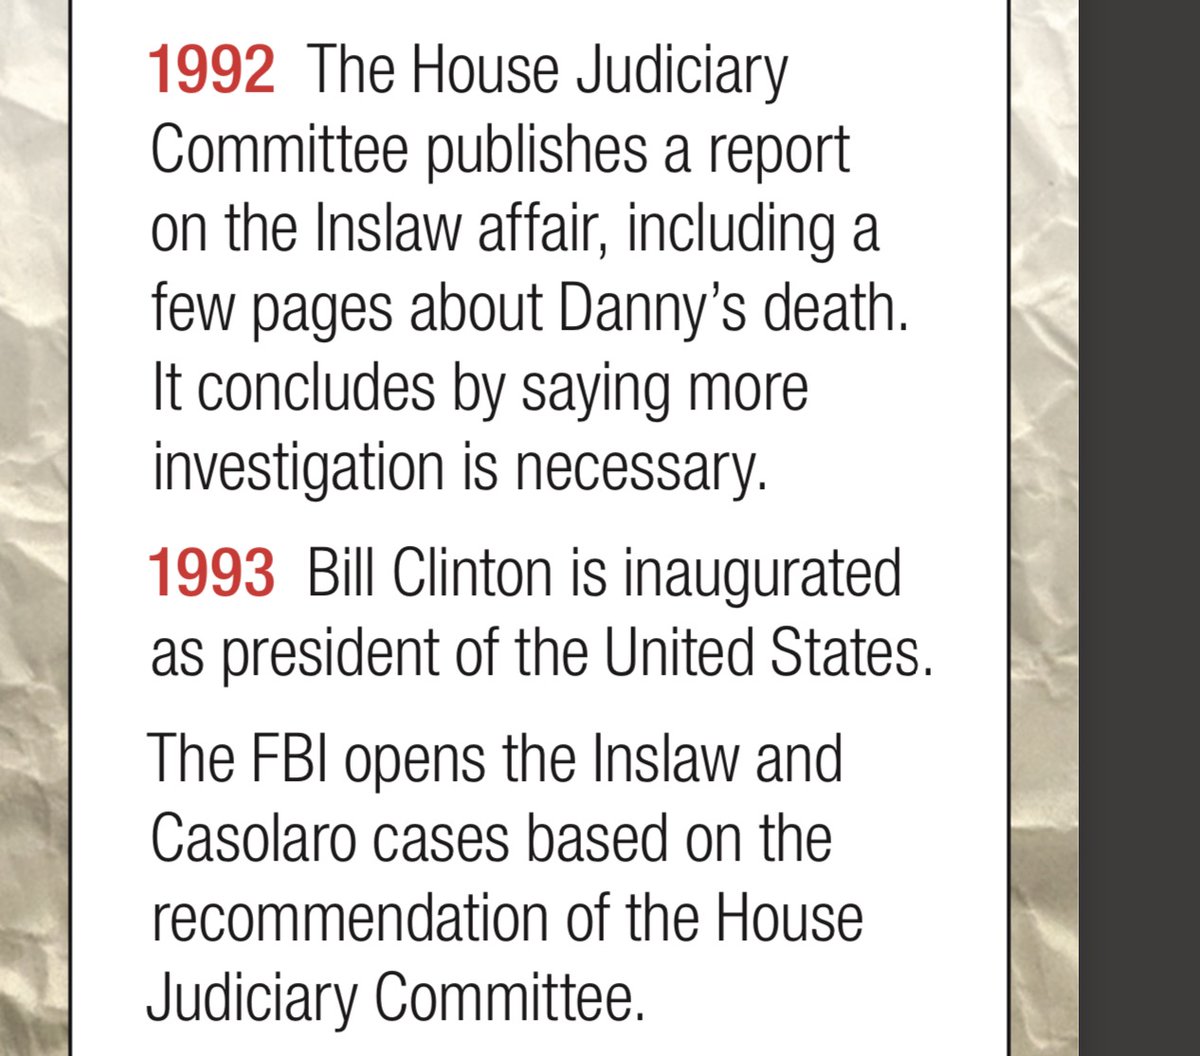 1992House Judiciary Committeepublishes report onInslaw affair,incl few pages about Danny Casolaro's death.It concludes by sayingmore investigation necessary.1993Bill Clintoninaugurated as president of U.S.